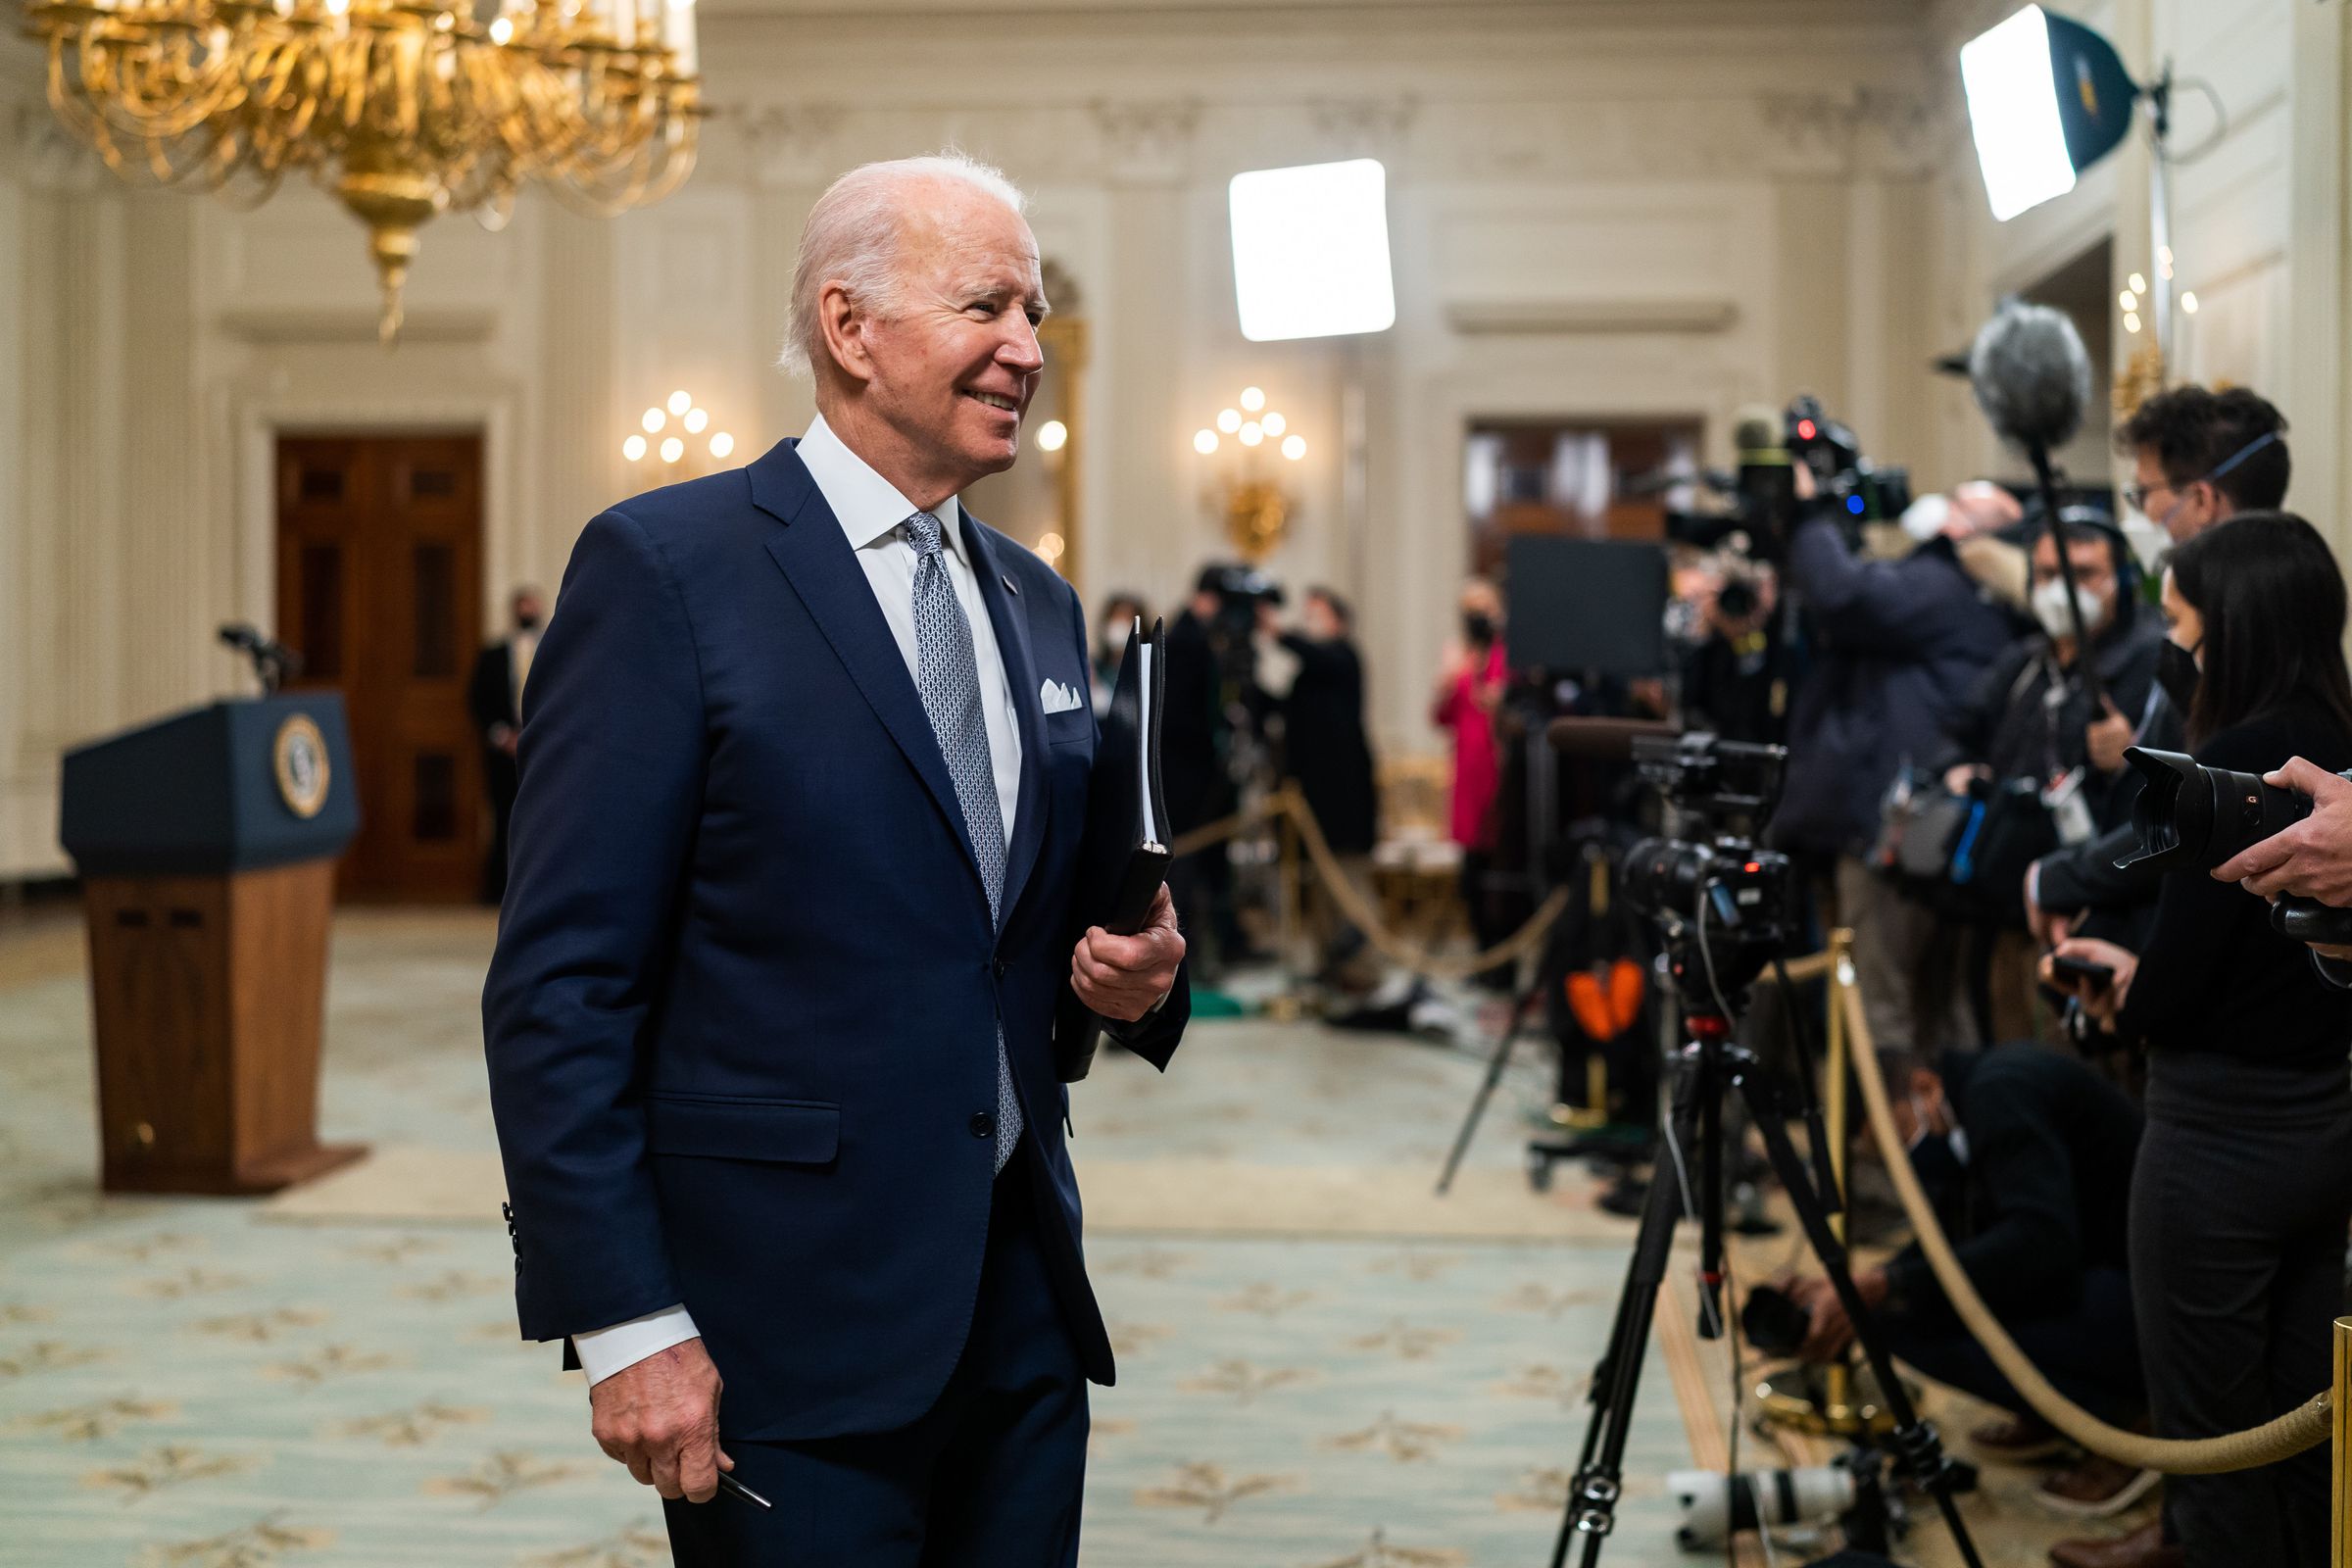 President Joe Biden smiles as he walks past members of the press after his remarks on the December jobs report, Friday, January 7, 2022, in the State Dining Room of the White House. (Official White House Photo by Cameron Smith)